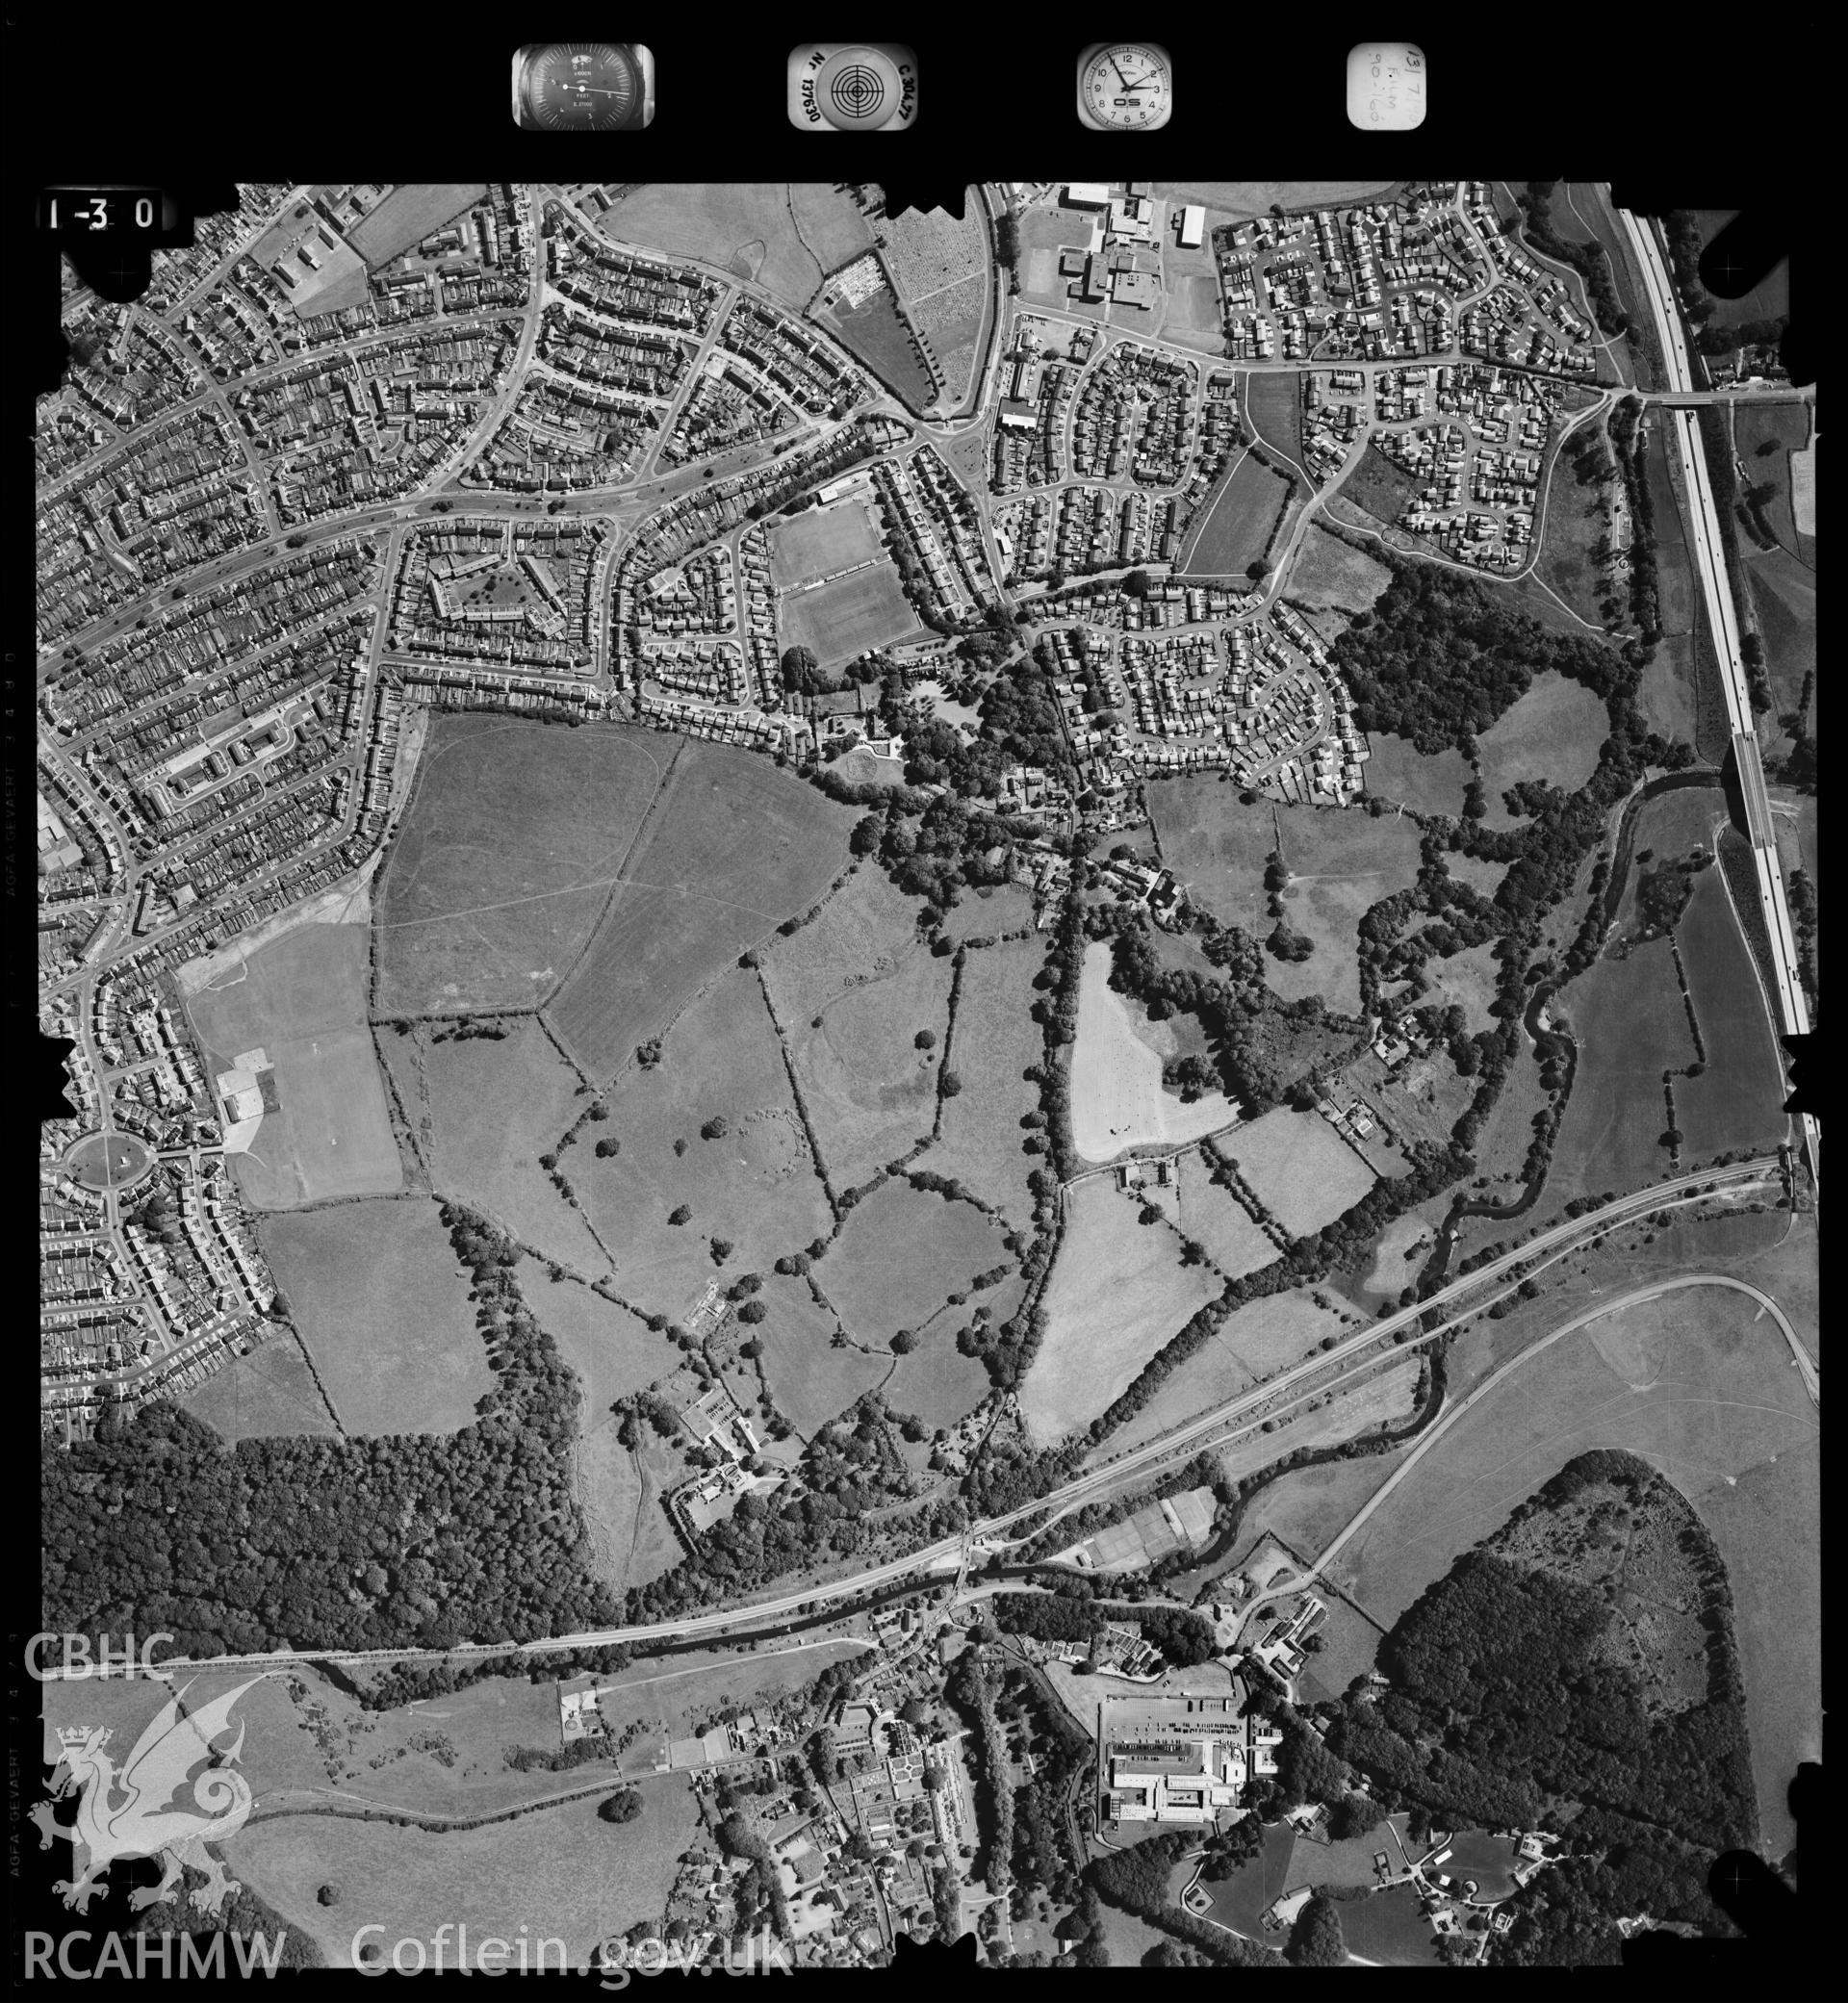 Digital copy of an Ordnance Survey aerial view of St Fagans area, dated 1990.